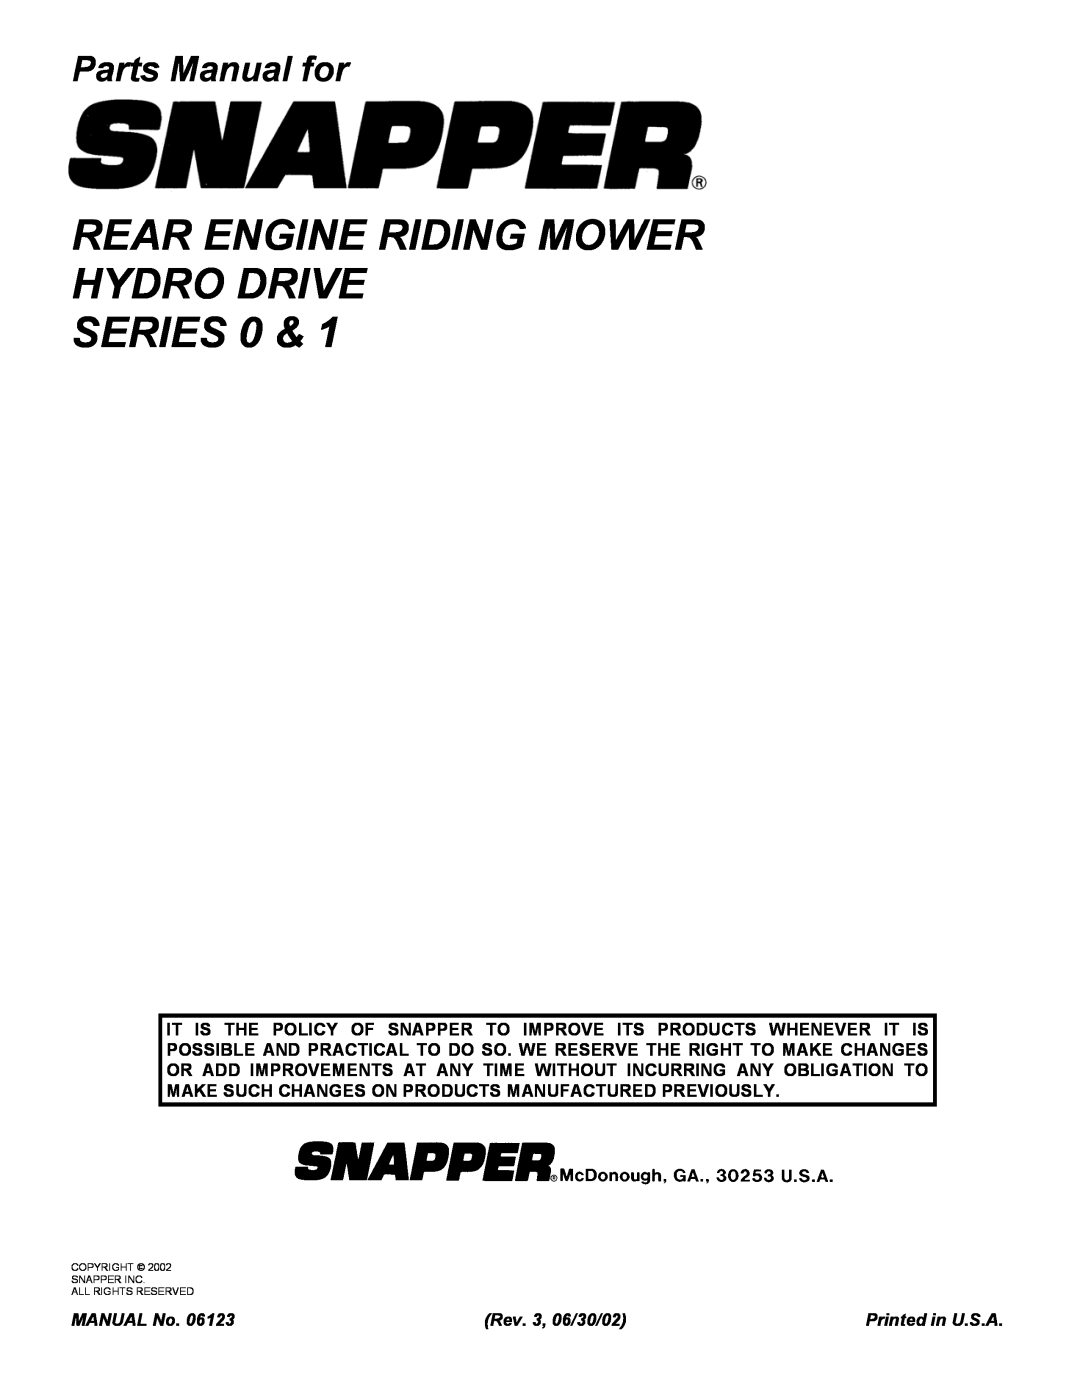 Snapper 381450HBVE manual Rear Engine Riding Mower Hydro Drive Series, Parts Manual for, MANUAL No, Rev. 3, 06/30/02 